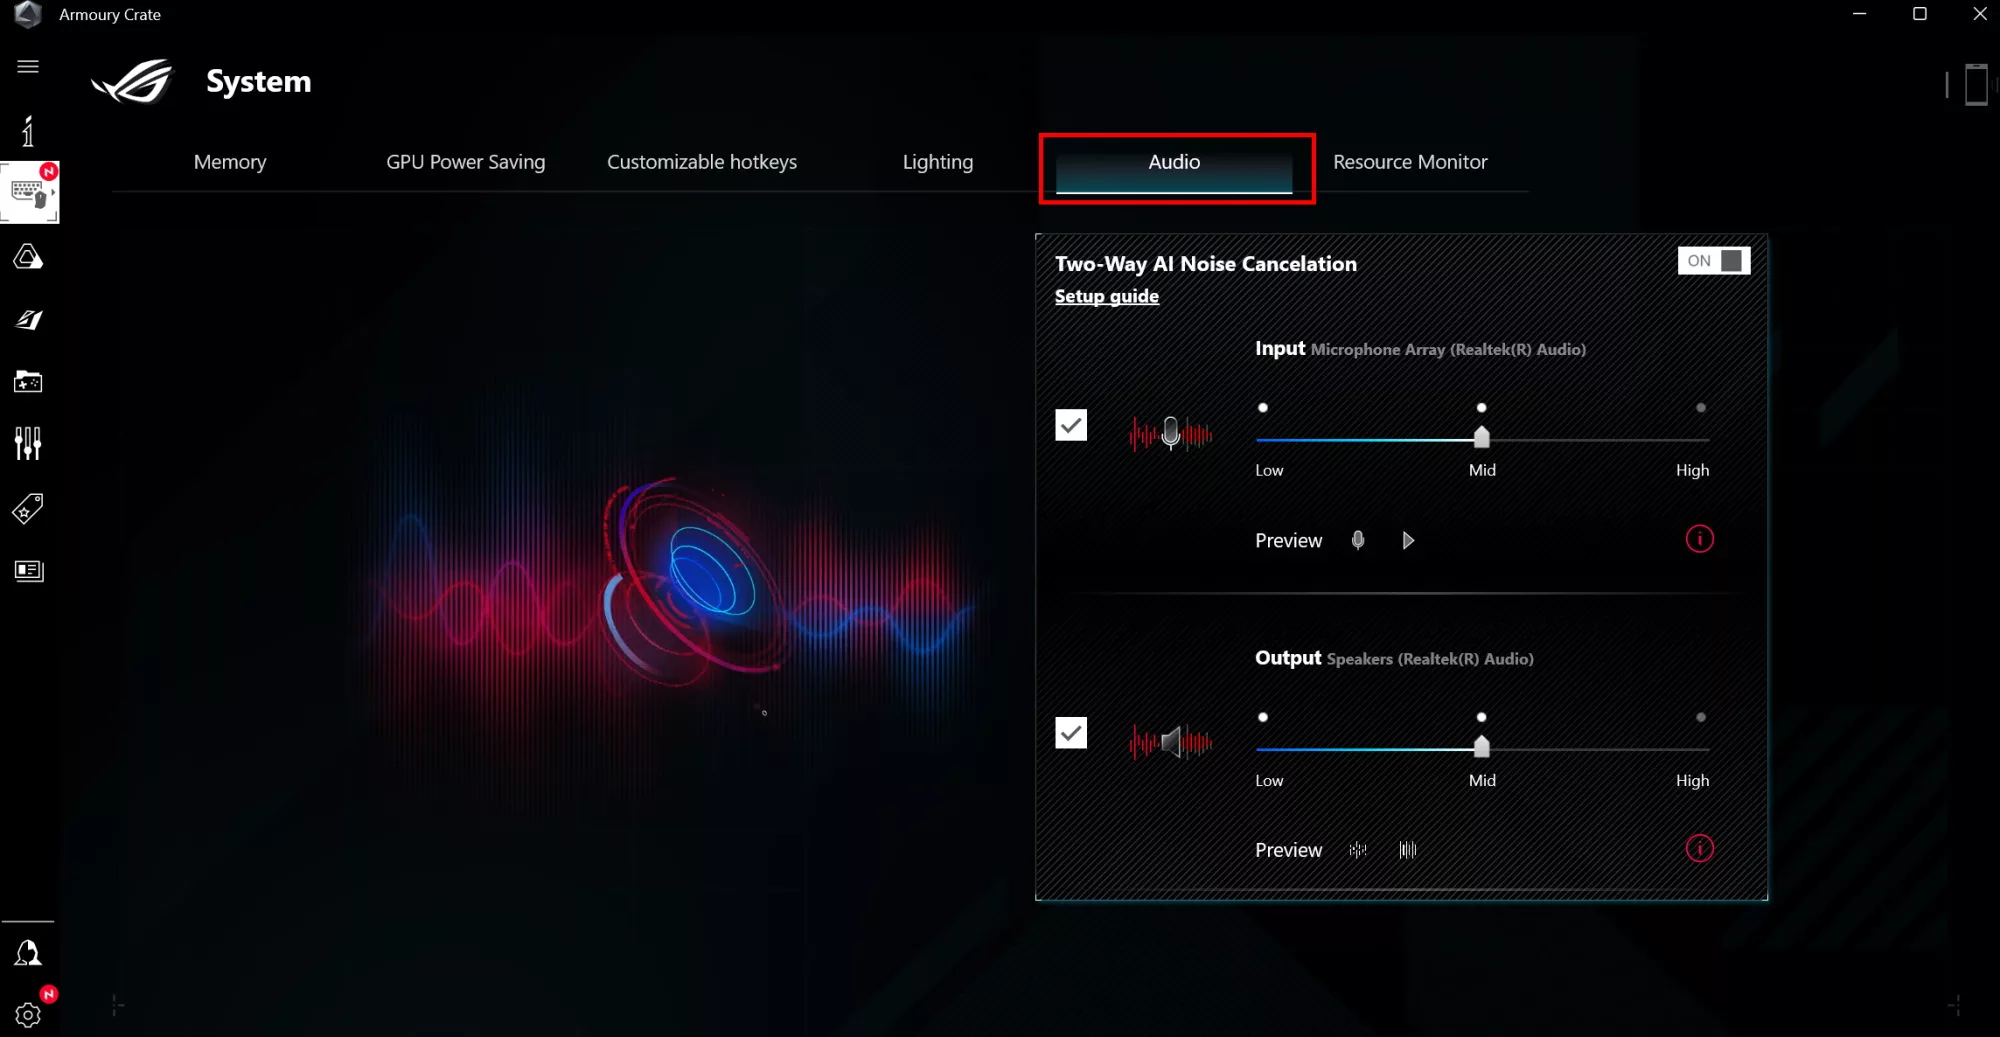 Screenshot of the Audio tab inside the System settings in Armoury Crate.